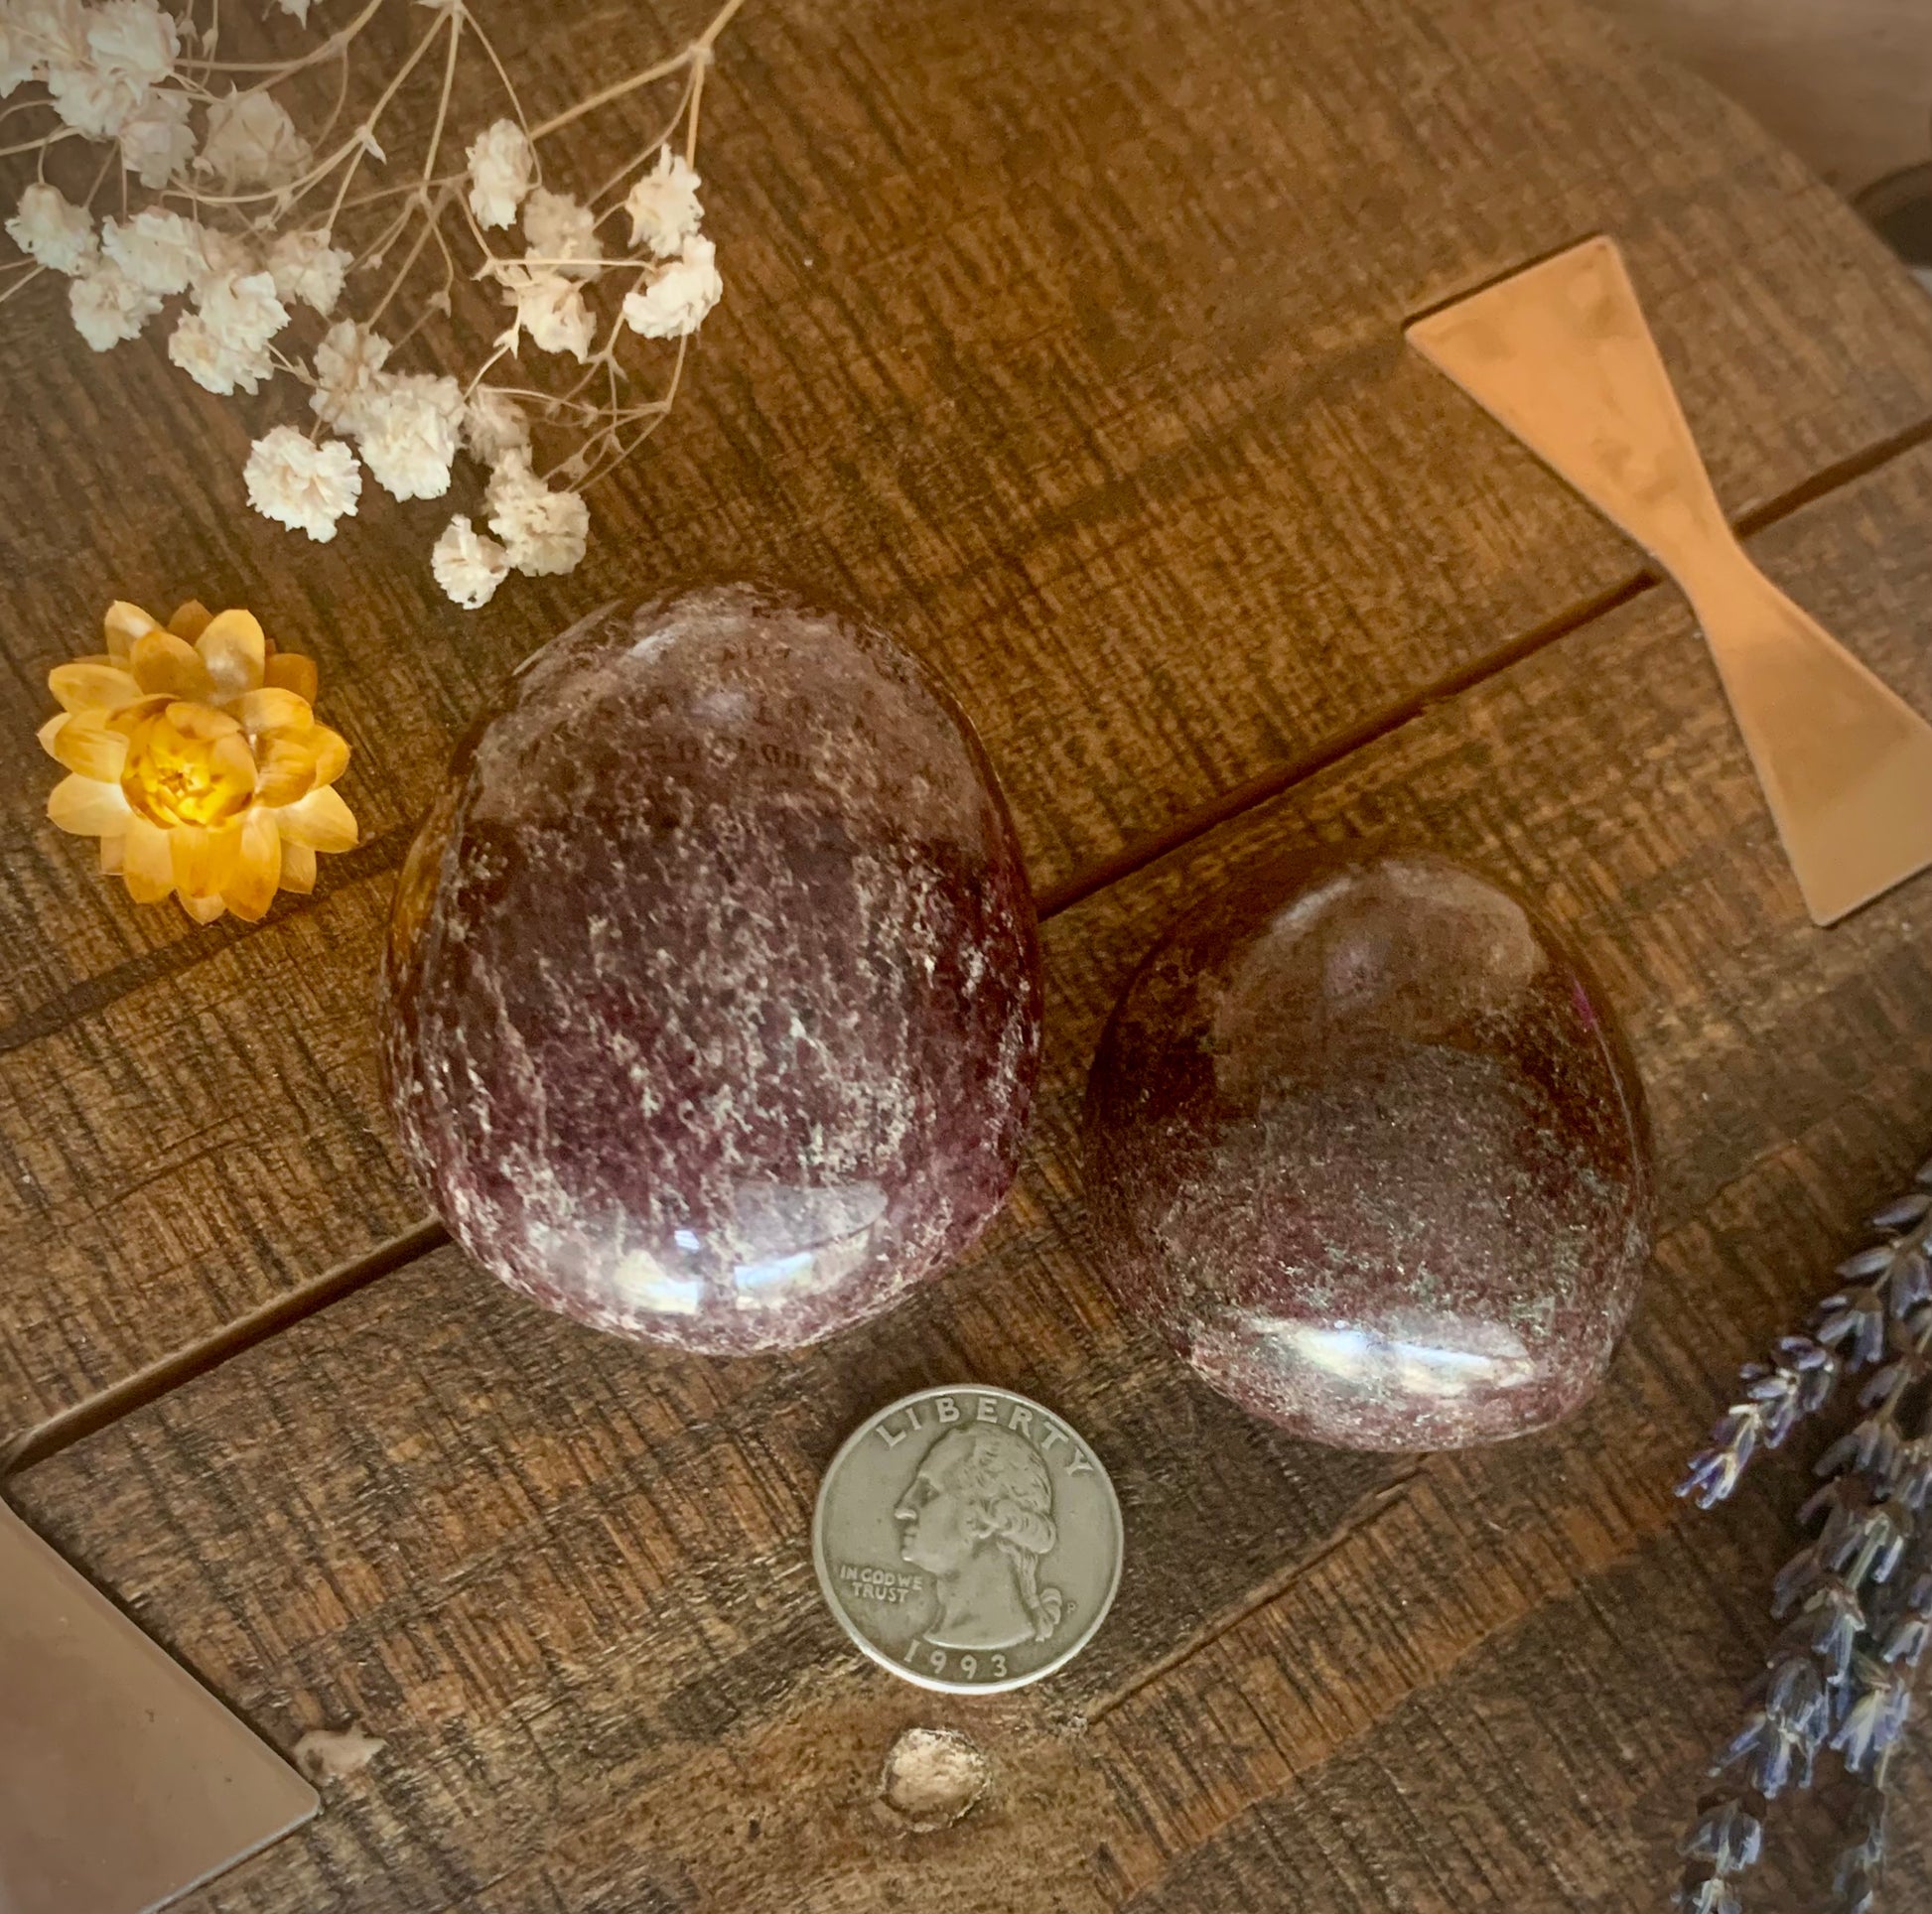 One large & one smaller Garnet palm stones on a wooden surface next to a US quarter for reference.